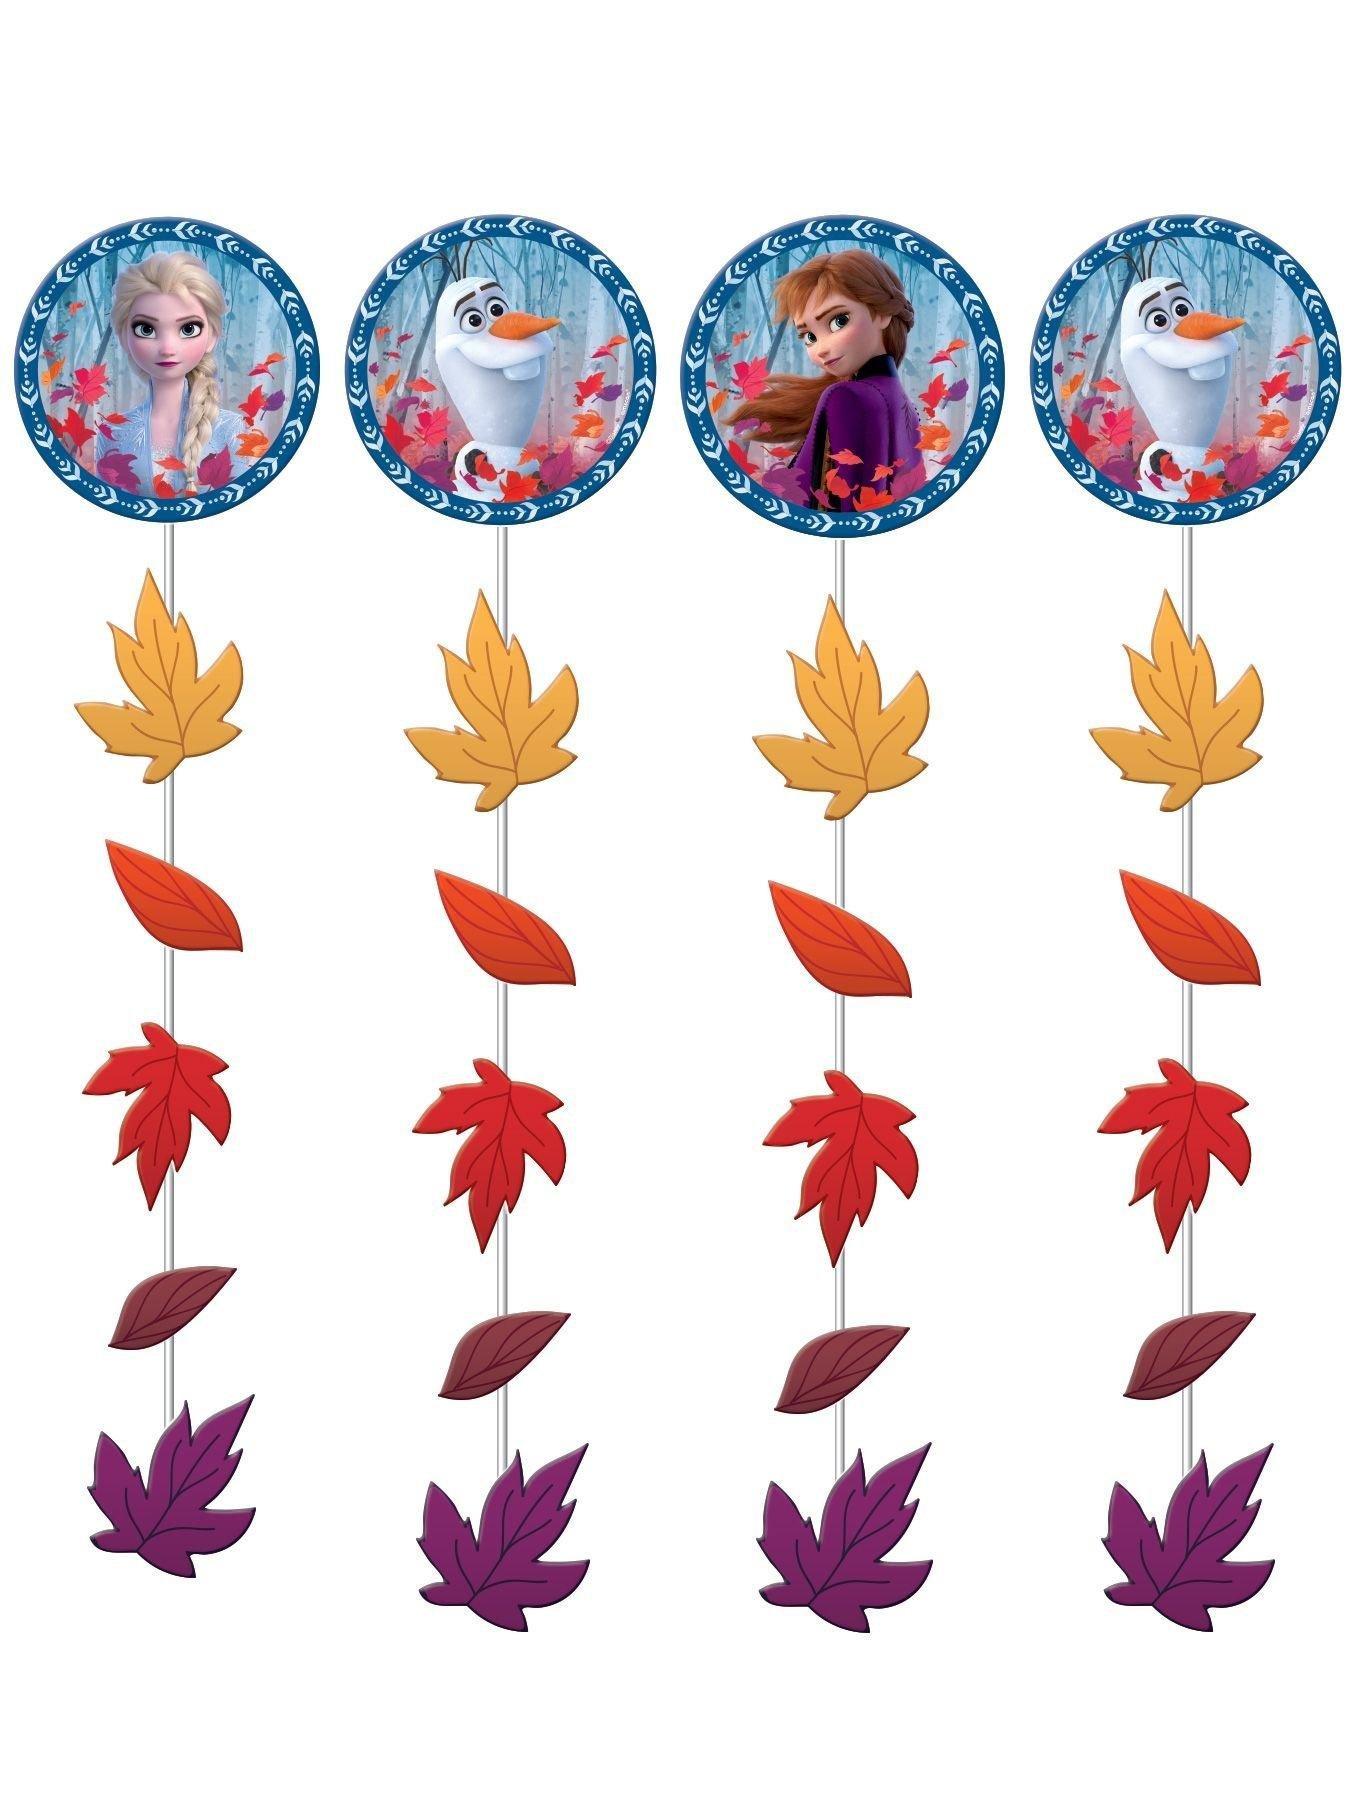 Frozen 2 Party Decorating Supplies Pack - Kit Includes Banner, Swirl Decorations & Centerpiece